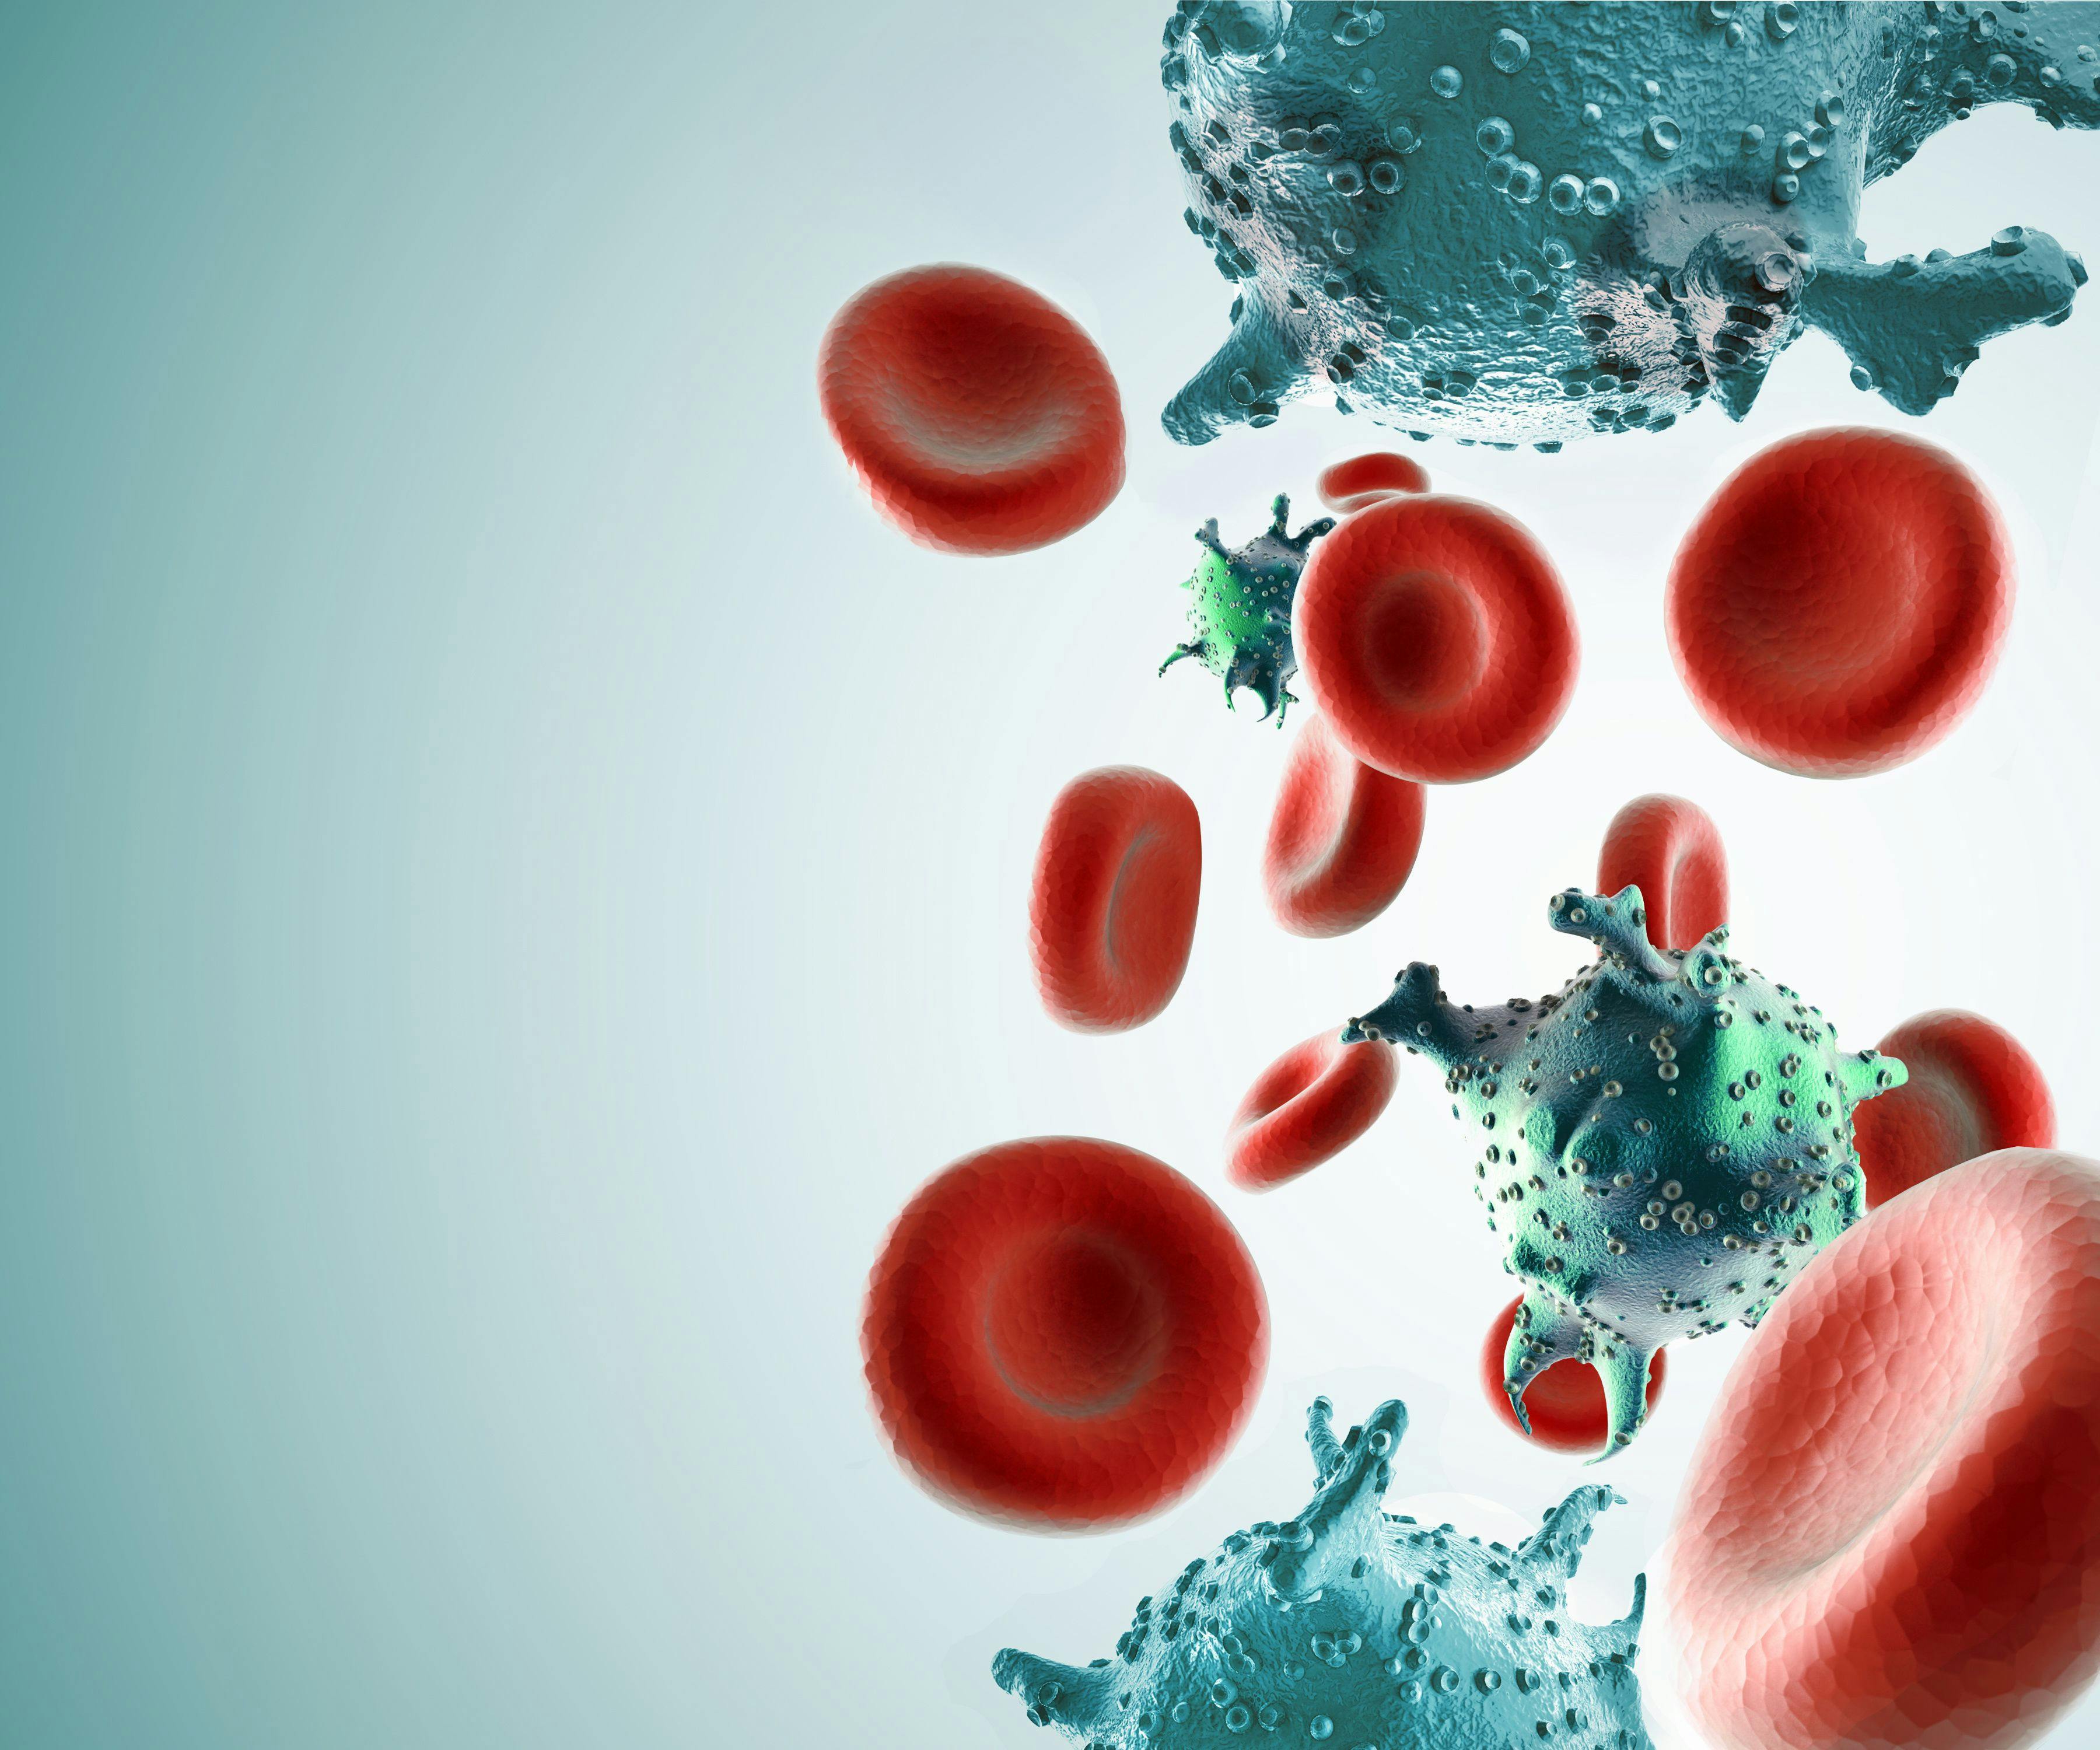 European Commission Approves Glofitamab in Relapsed/Refractory DLBCL